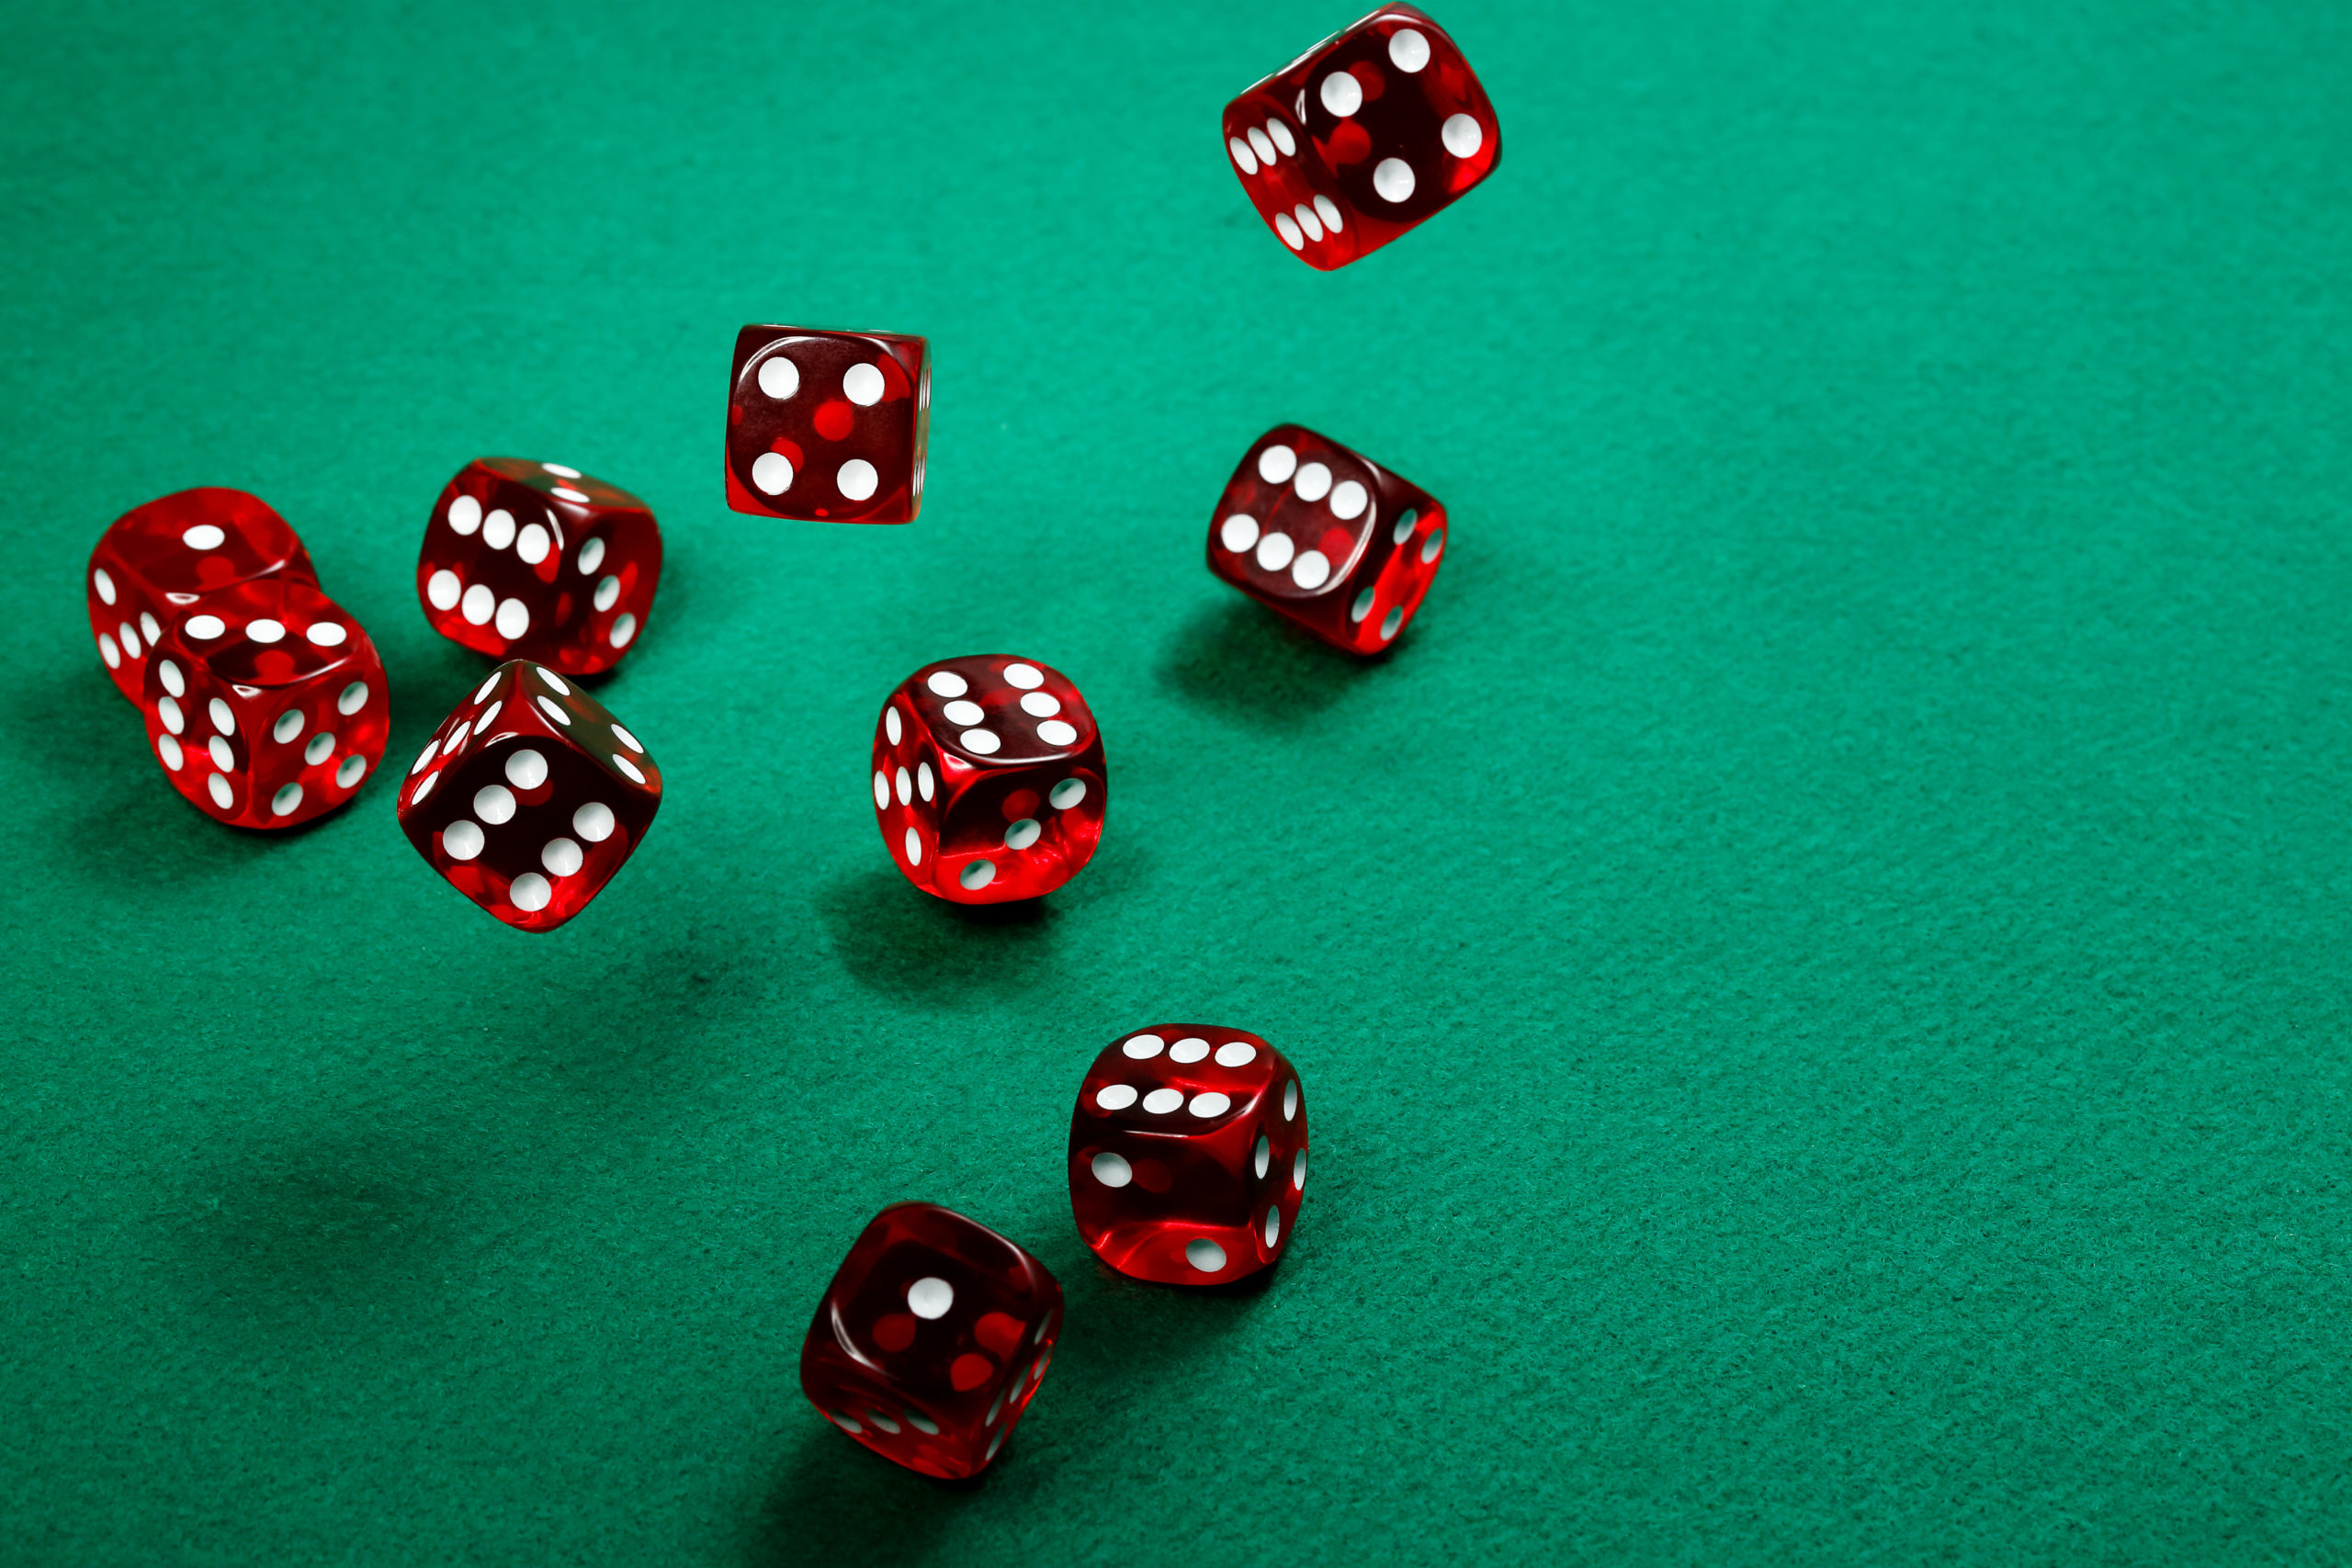 List Released Of America’s Most Gambling-Addicted States